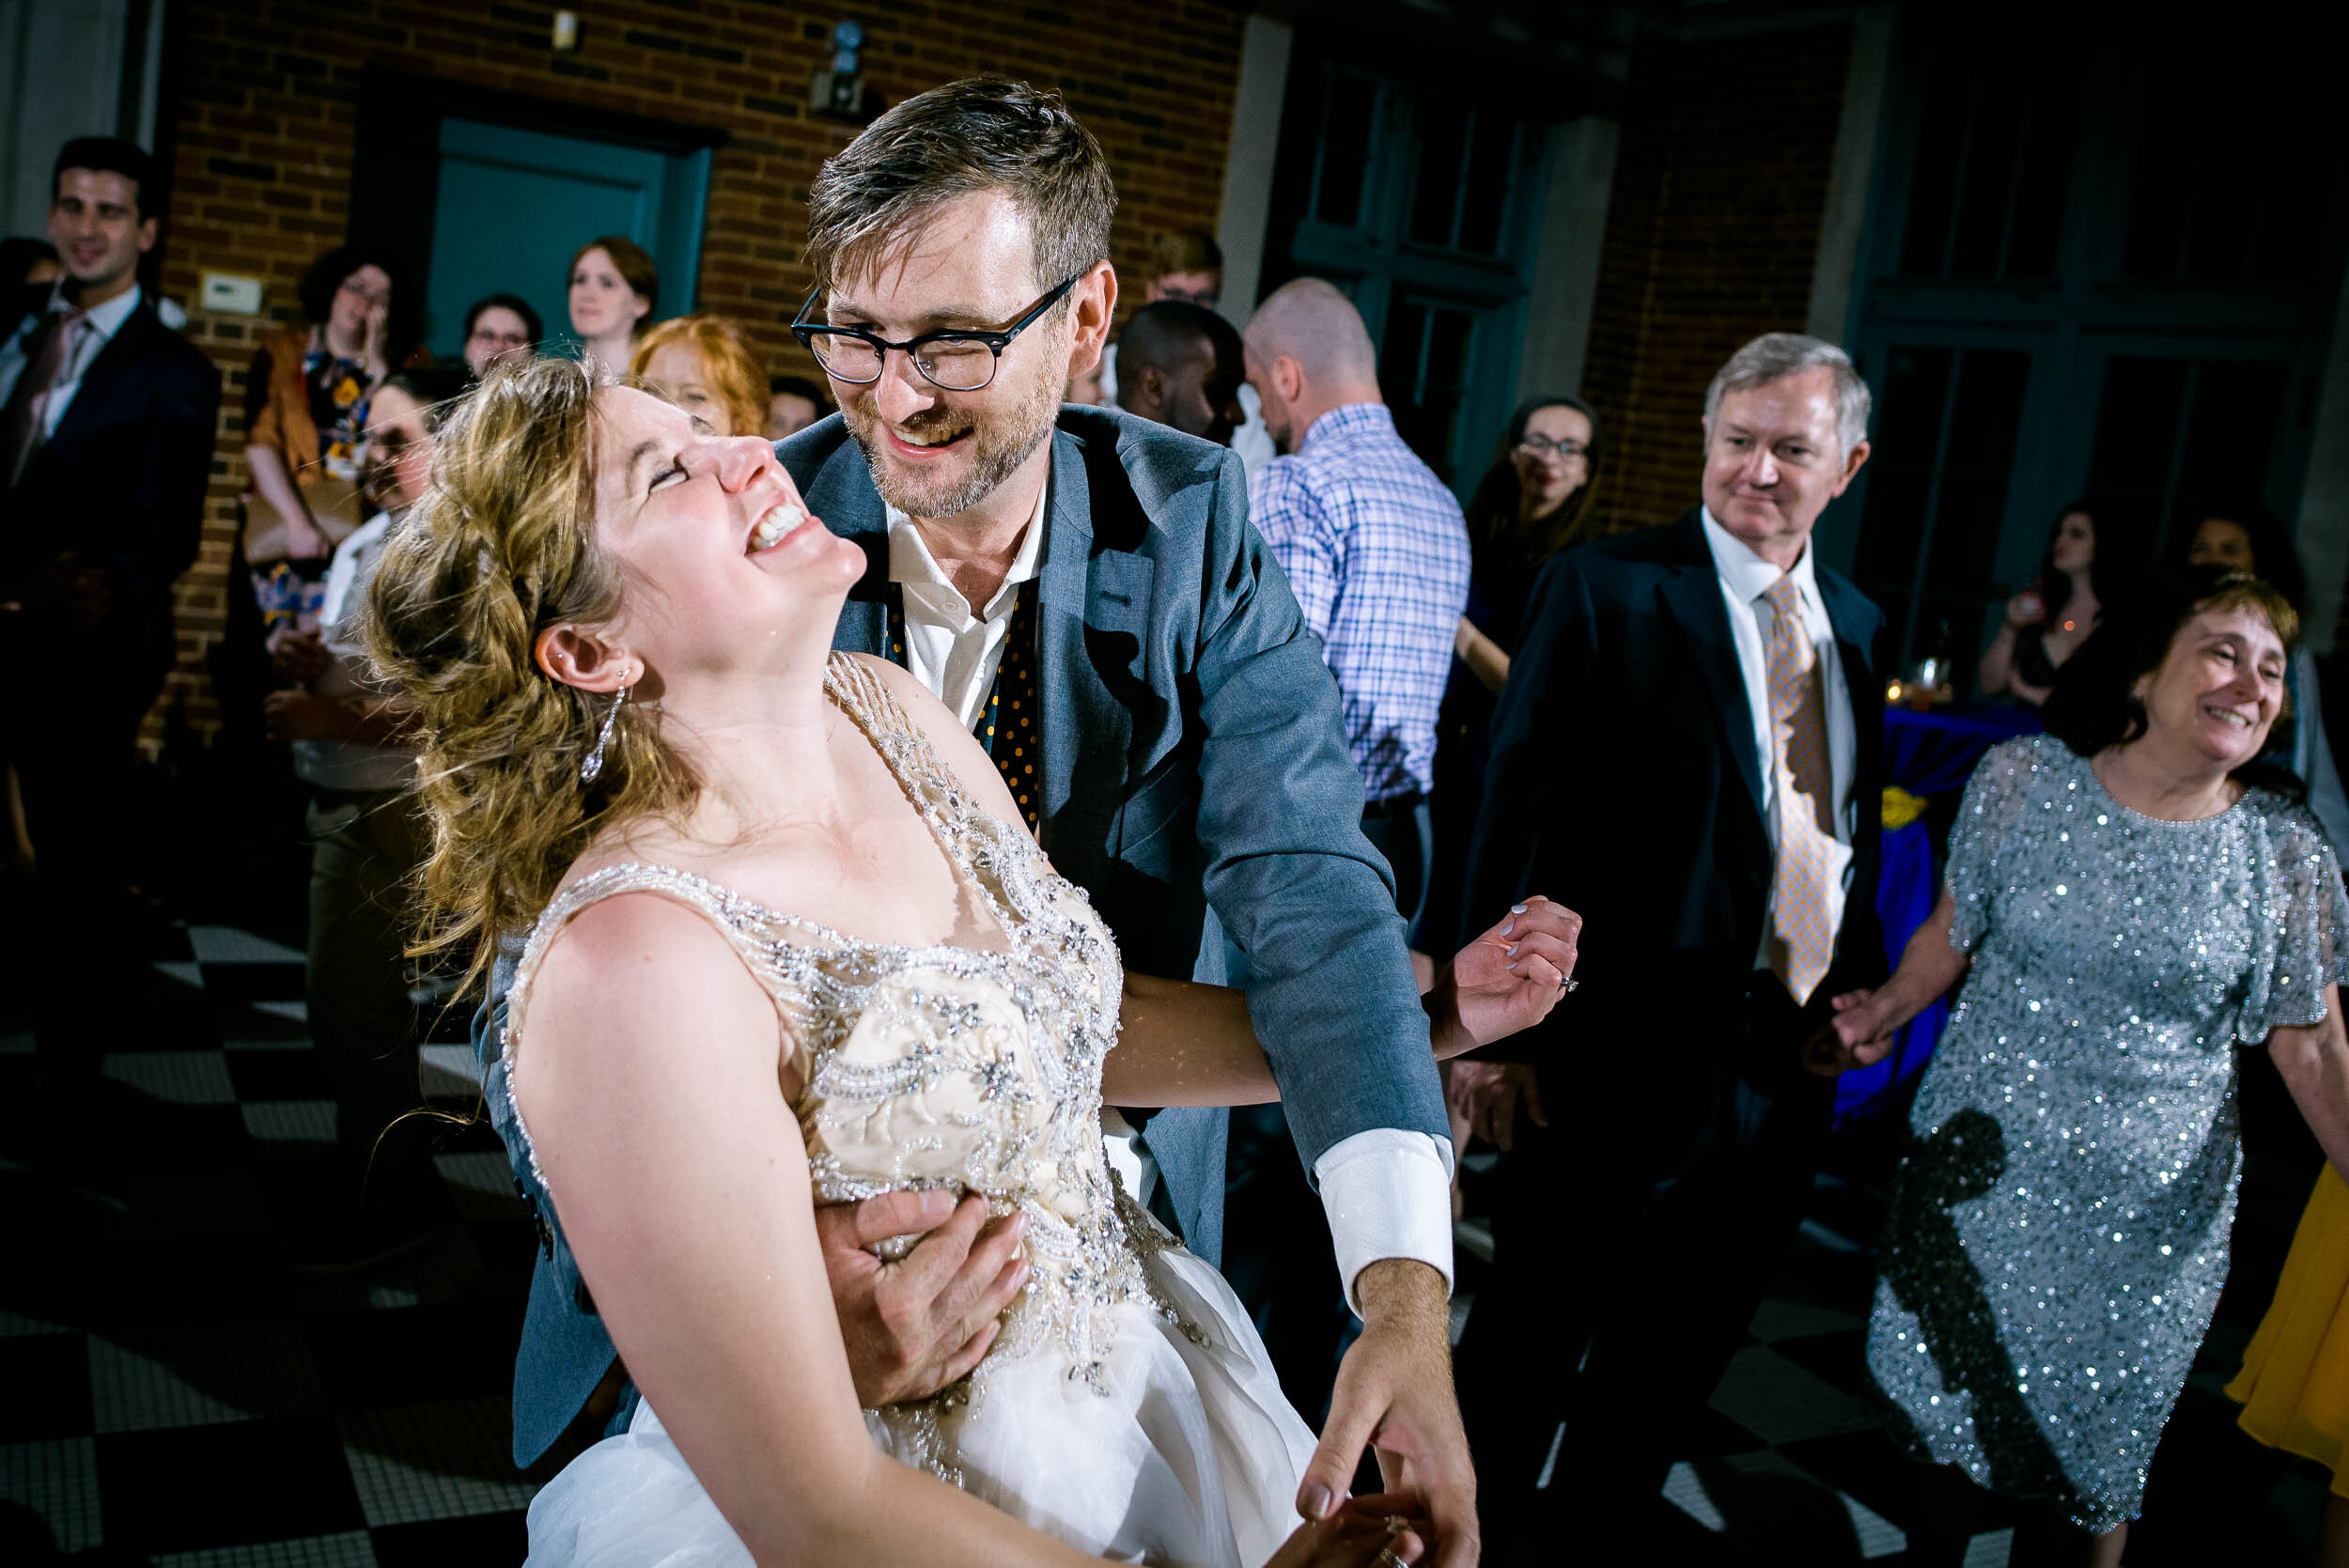 Bride and groom on the dance floor during the reception: Columbus Park Refectory Chicago wedding captured by J. Brown Photography.